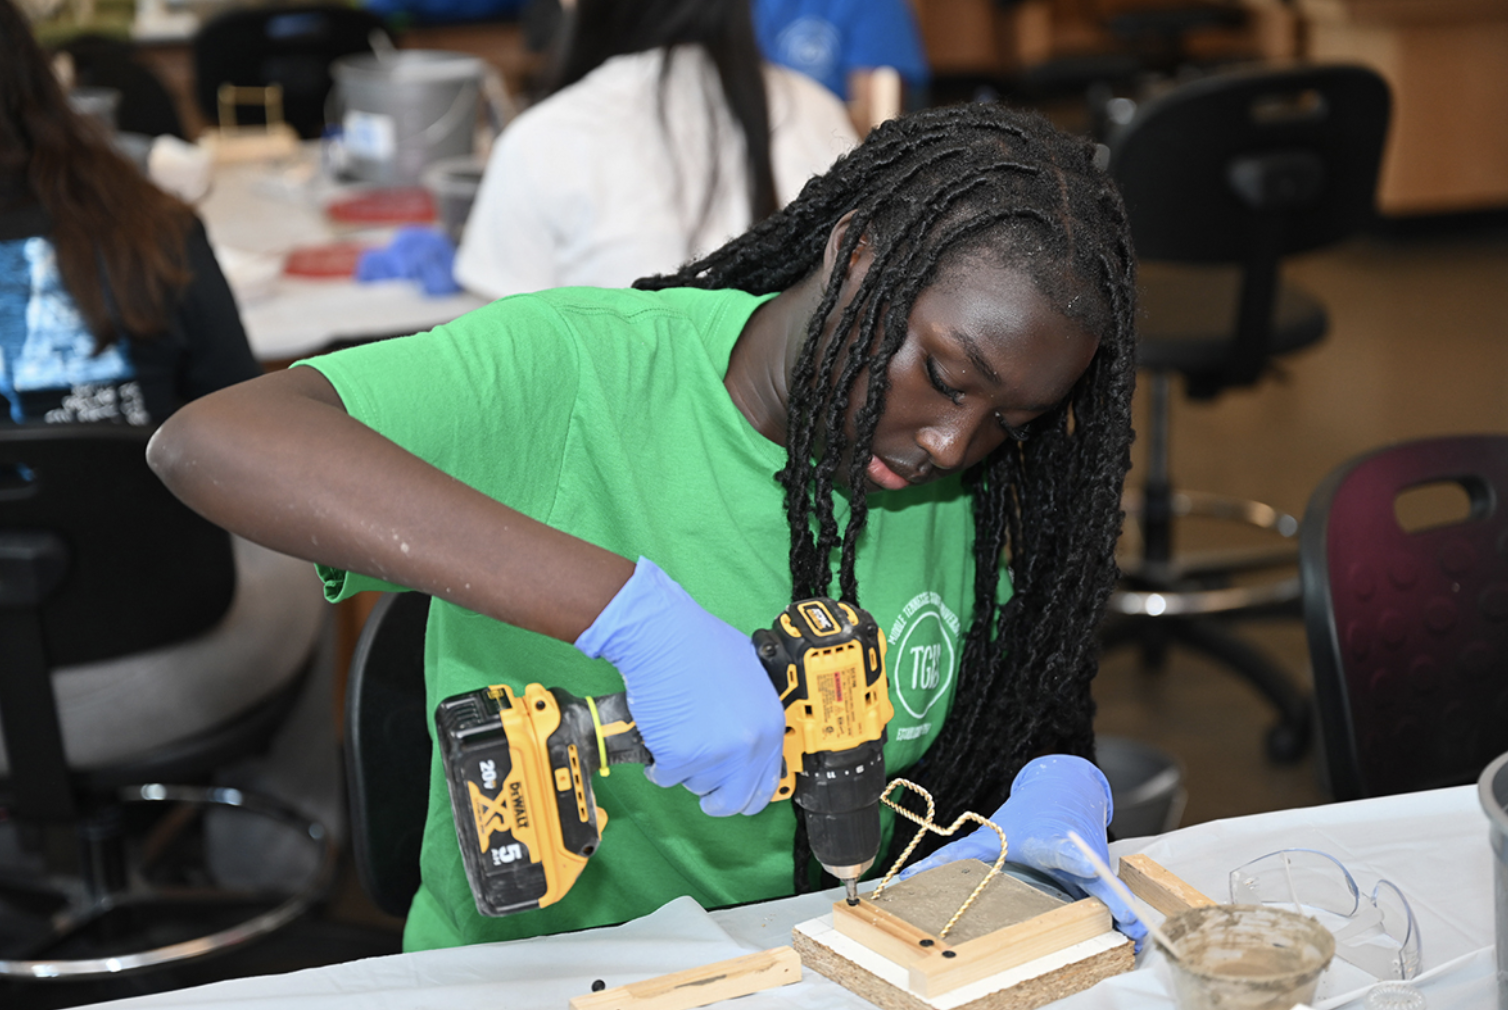 A middle school student uses a drill while completing her concrete coaster she made recently using with materials provided by the Middle Tennessee State University School of Concrete and Construction Management during the during the annual Tennessee Girls in STEM Conference at MTSU Saturday, Sept. 30. (MTSU photo by James Cessna)